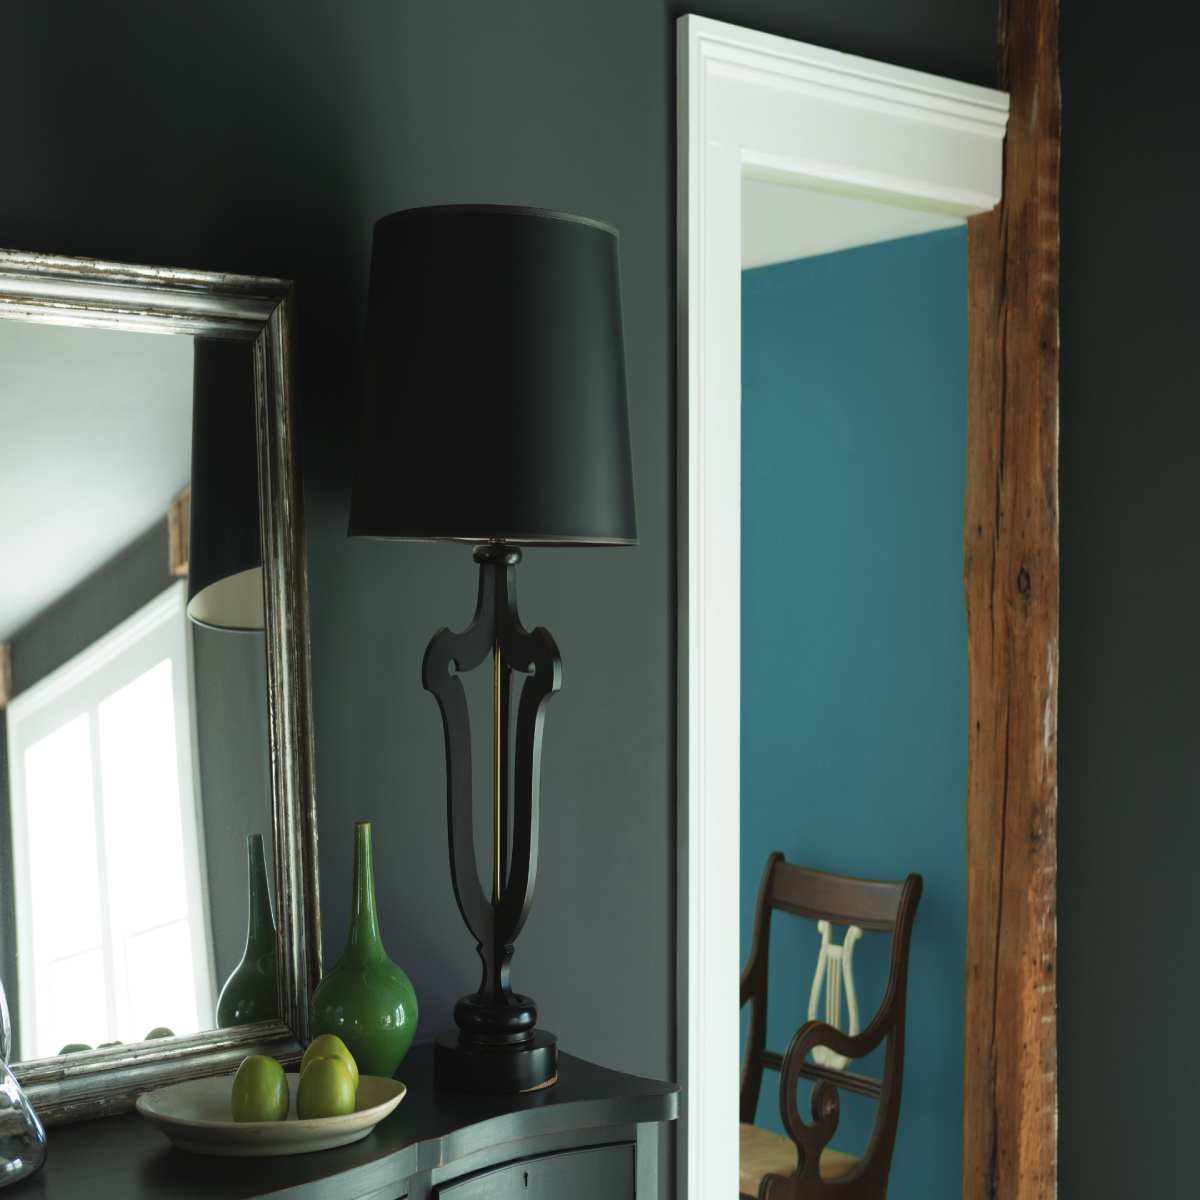 Mirror with Black table lamp kept on side